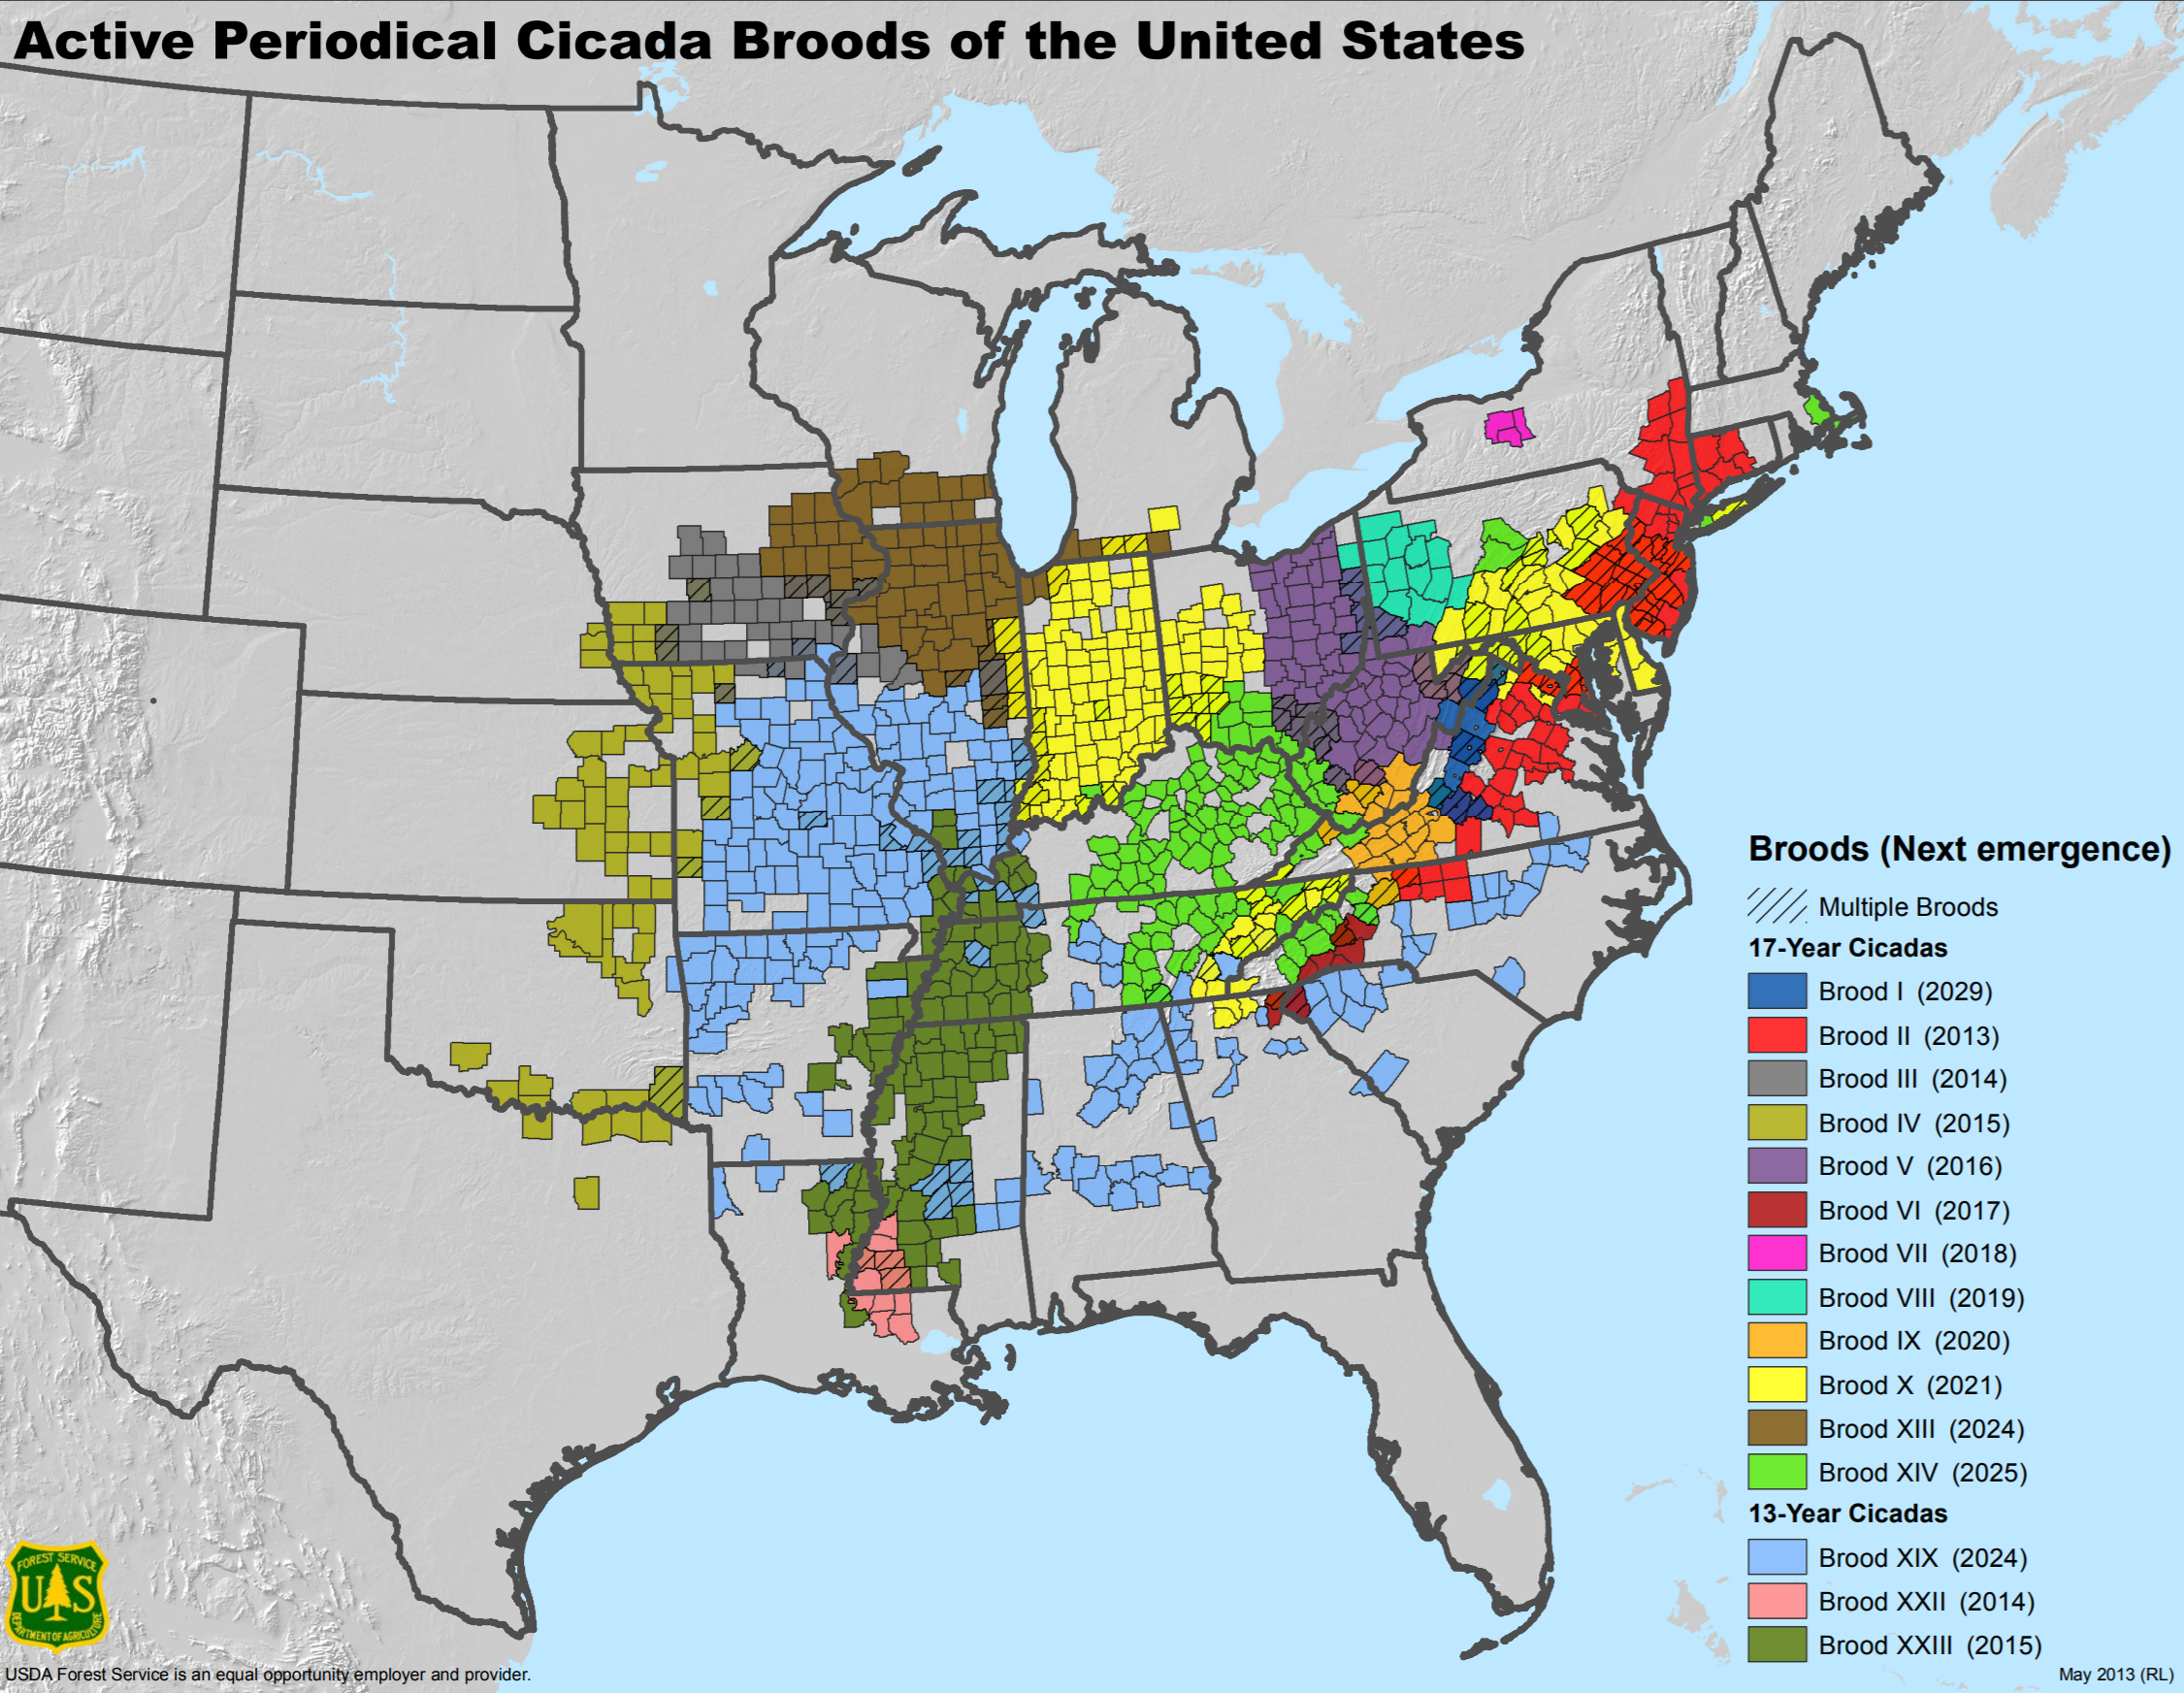 A map showing the different active periodical cicada broods in the United States.